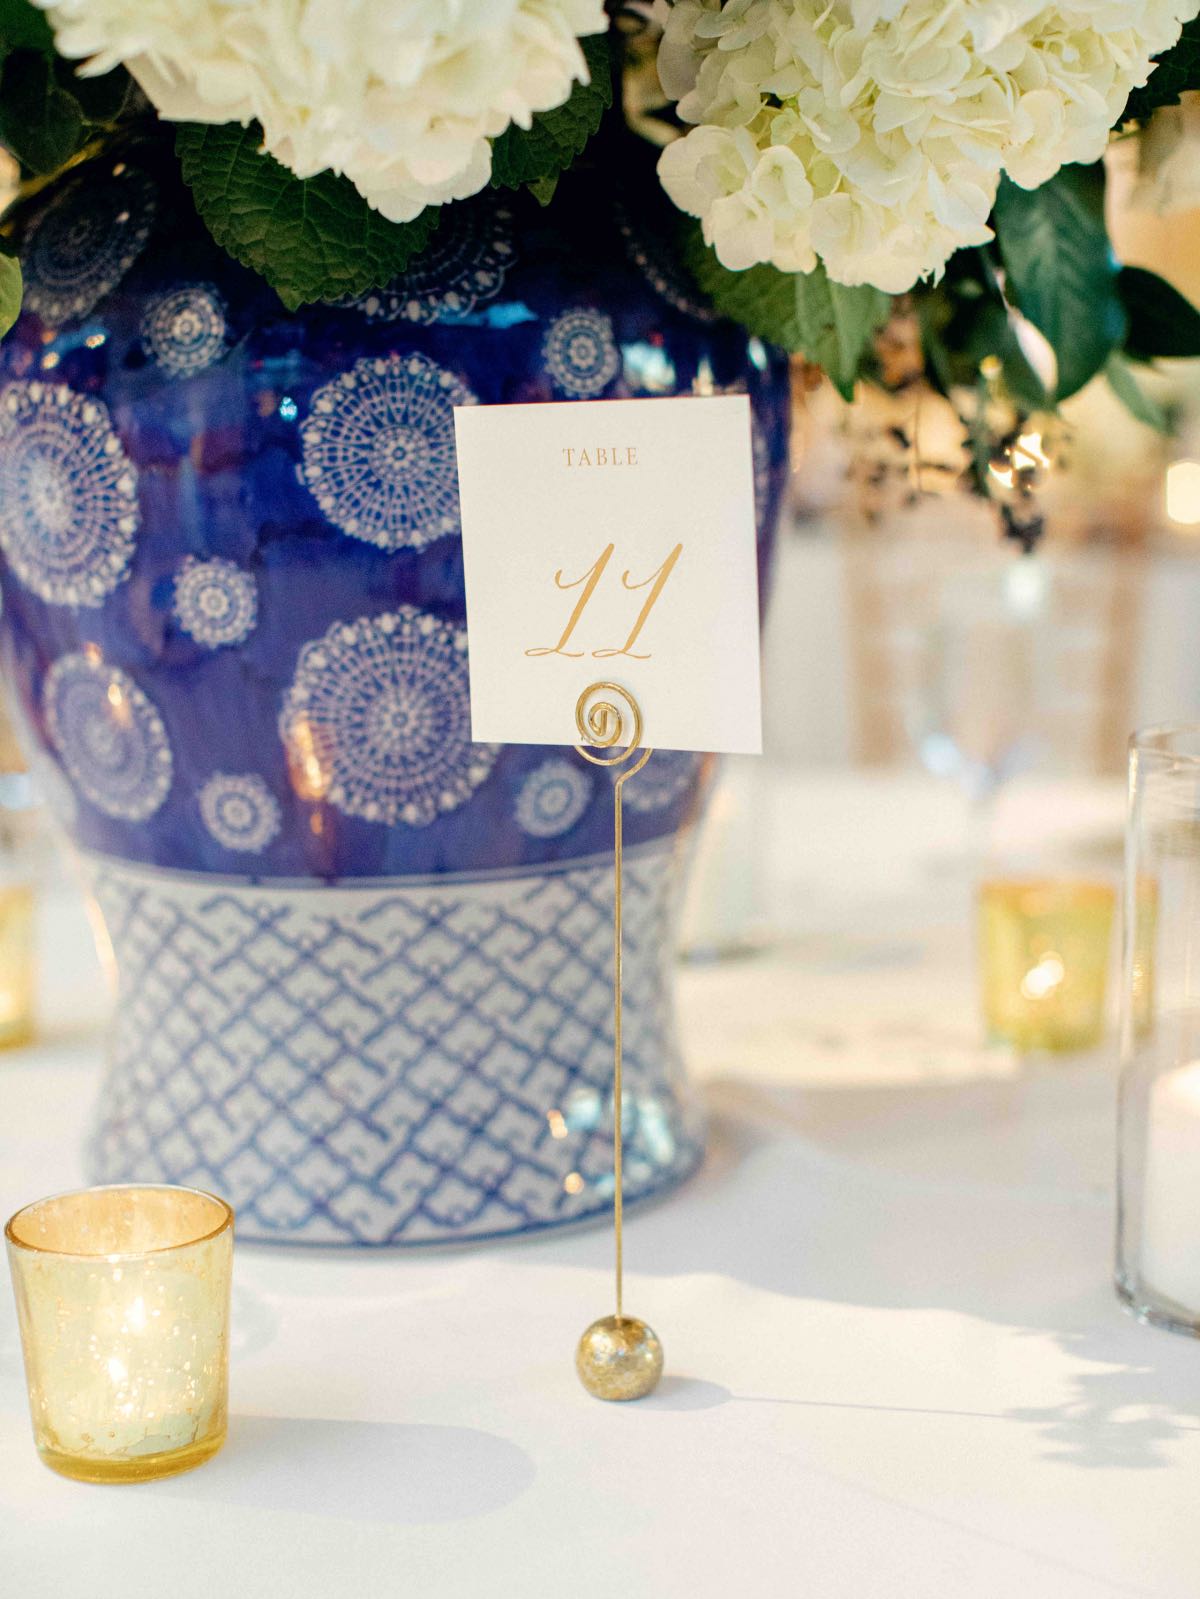 46 Gold White Table Numbers